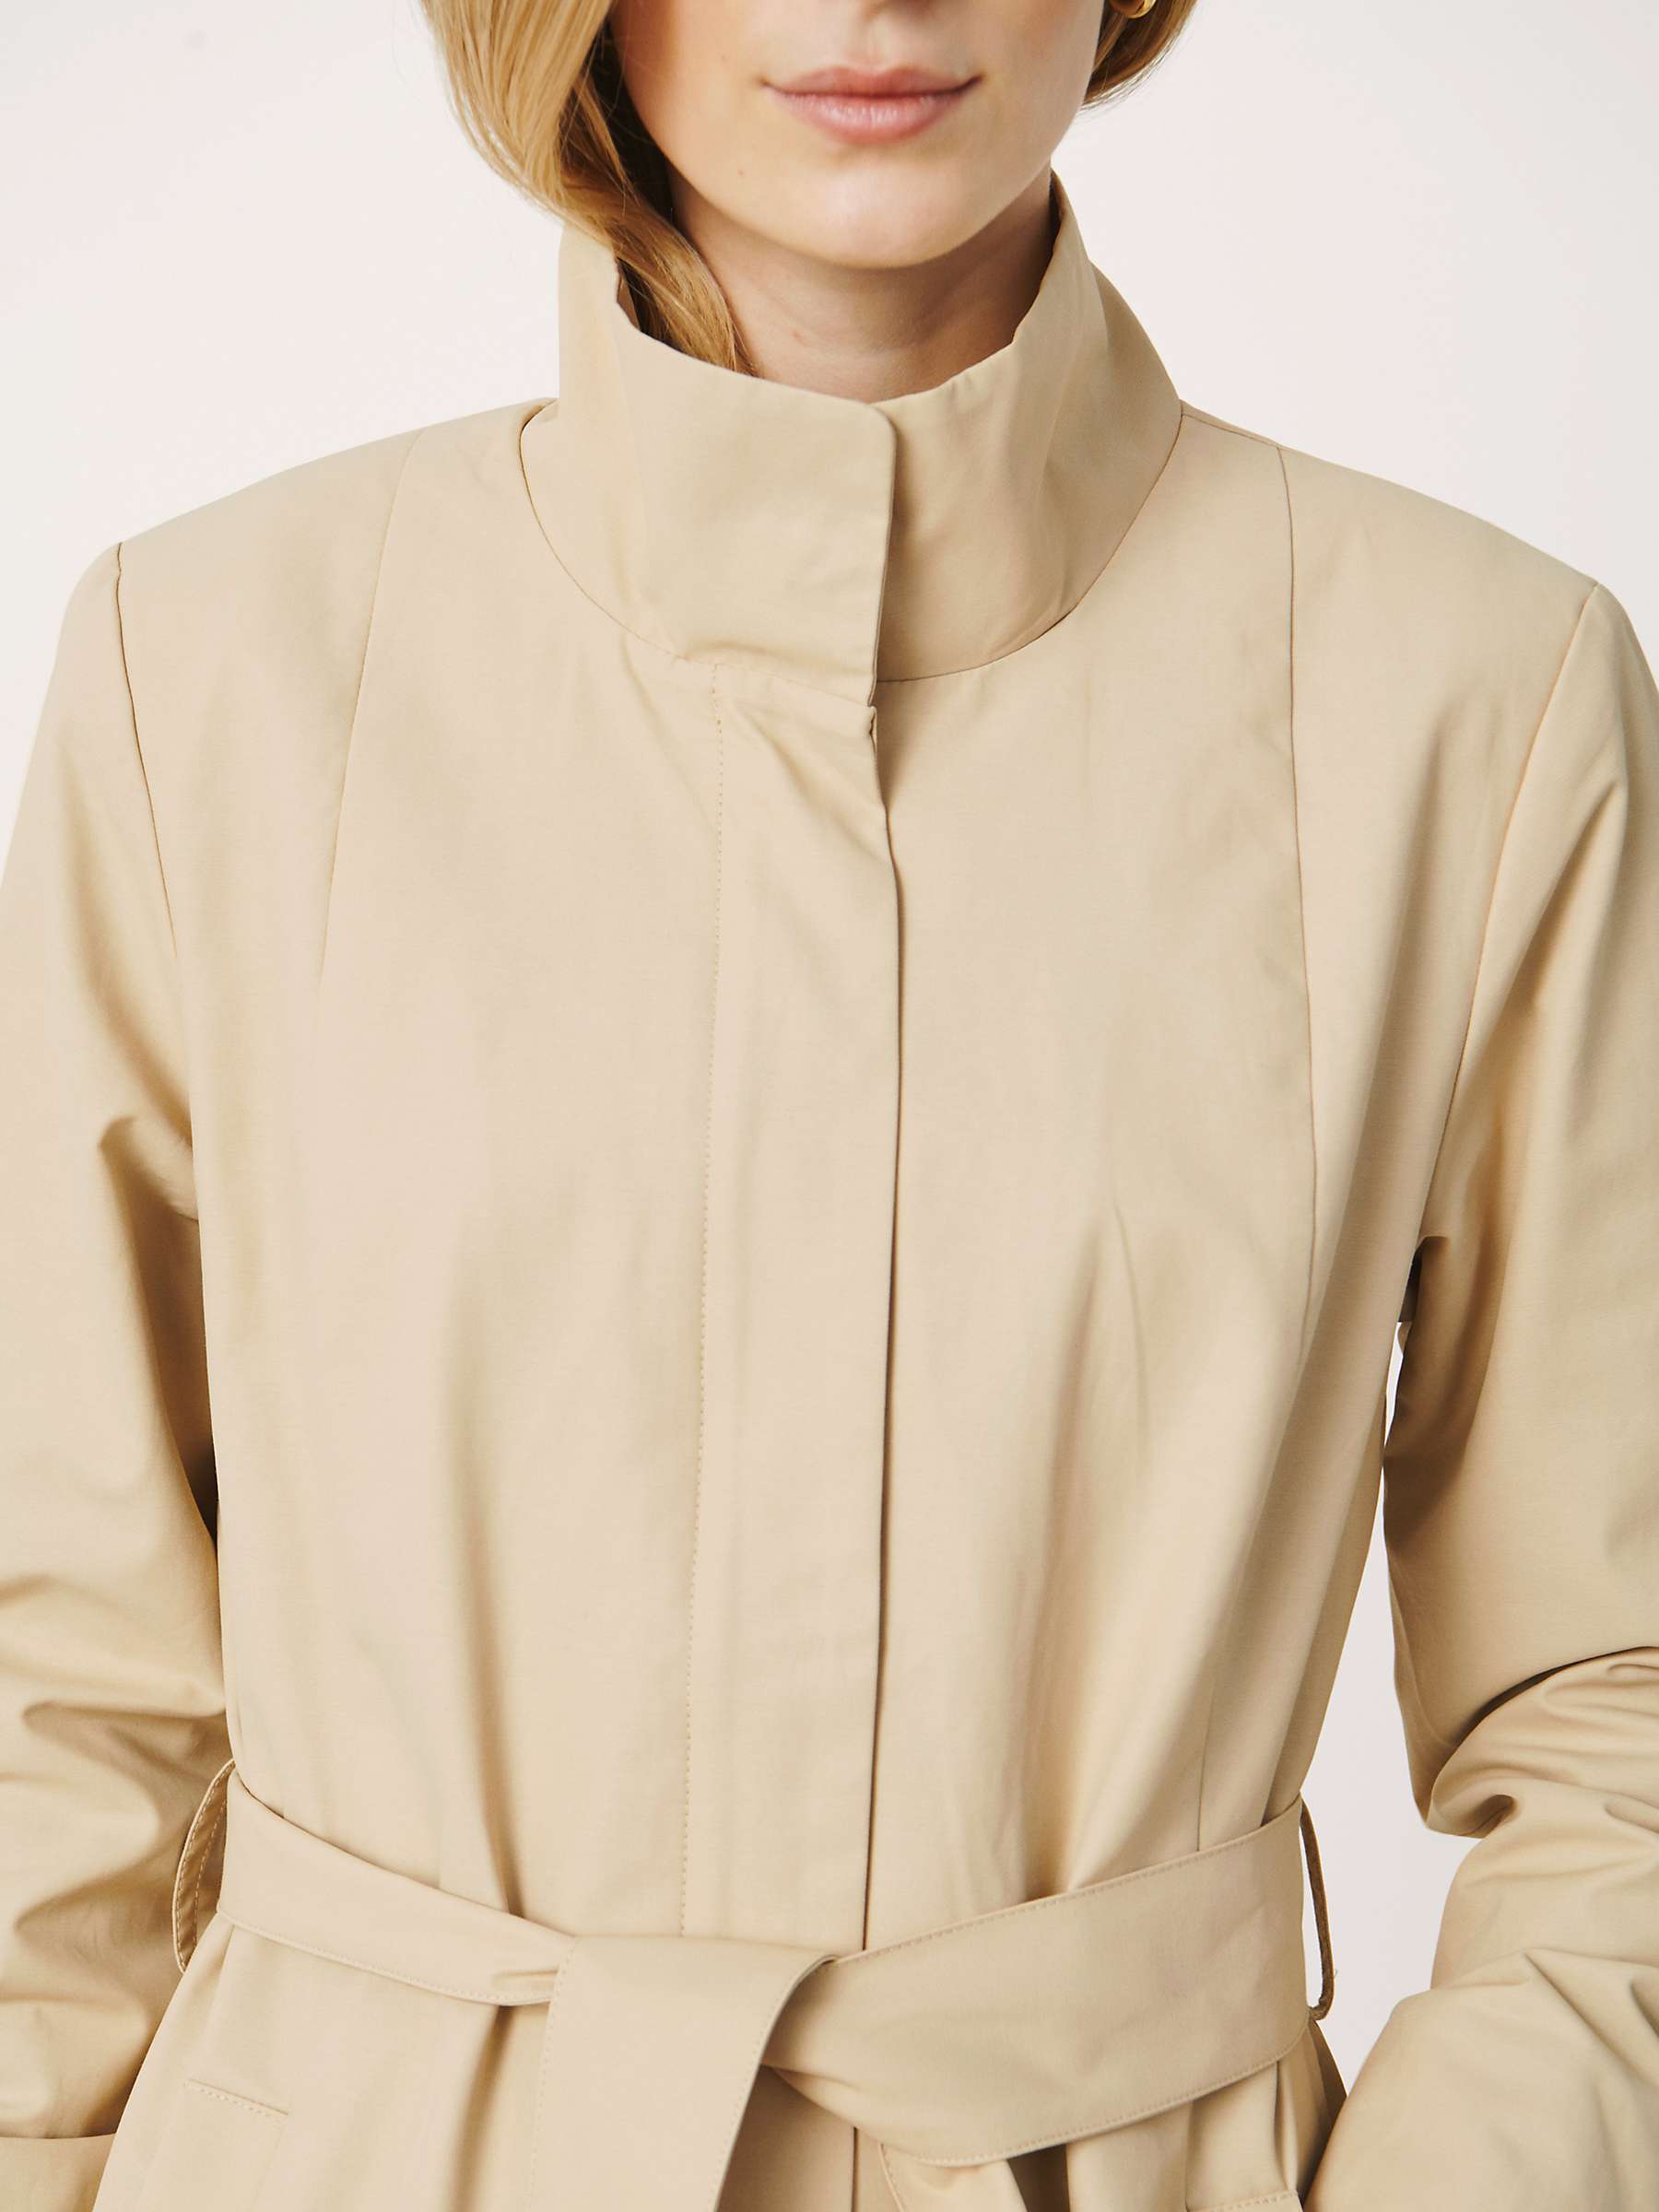 Buy Part Two Carvine Classic Fit Trench Coat Online at johnlewis.com